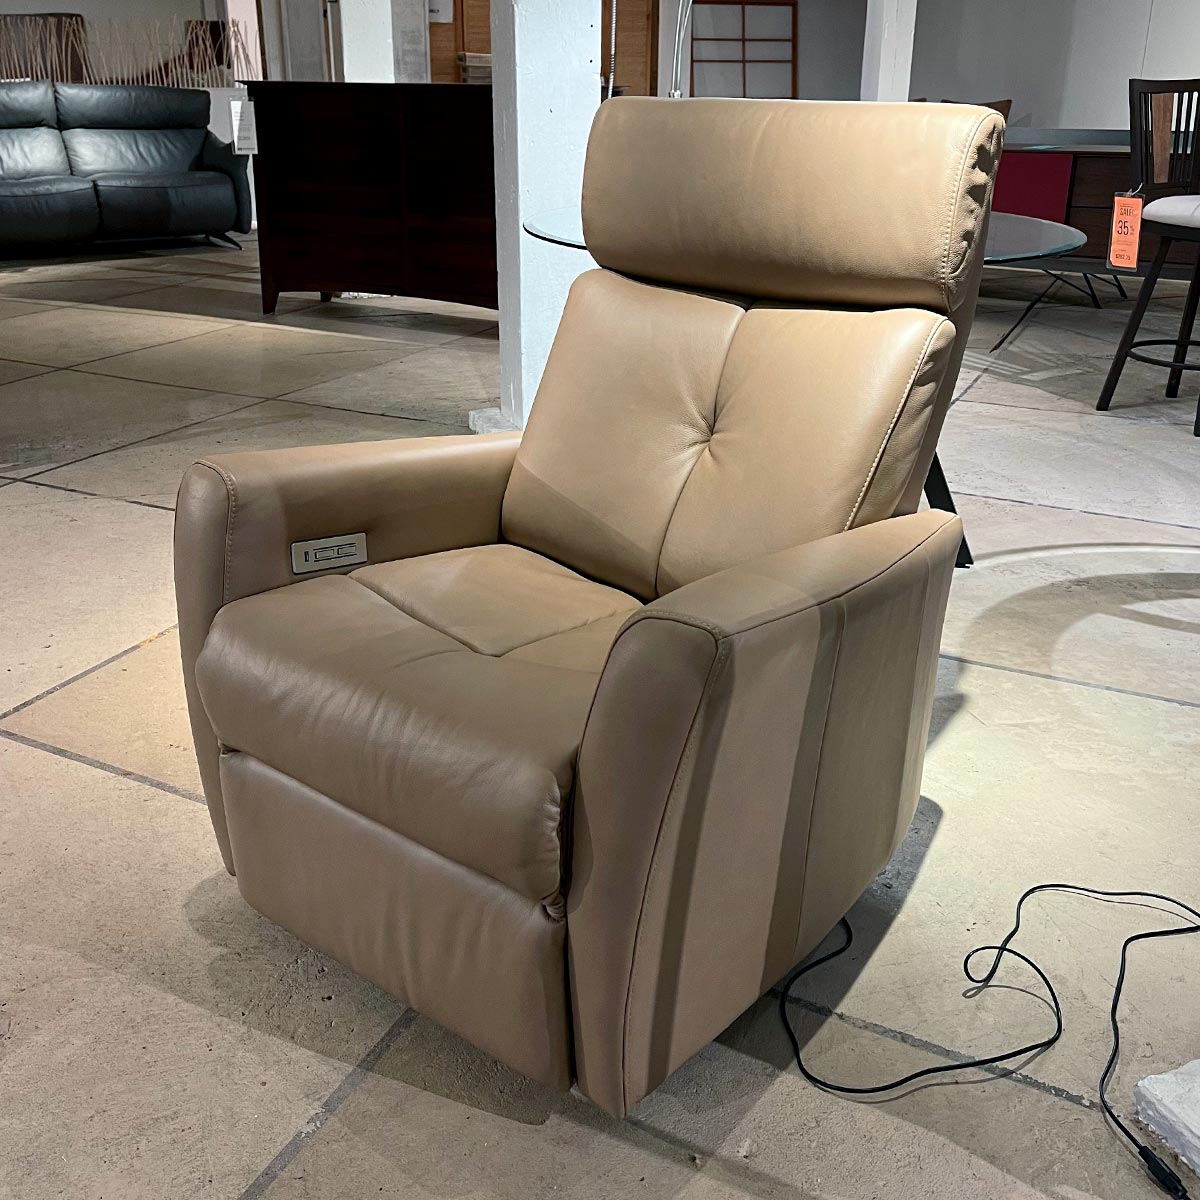 FHFOutlet_ProdigyIIPowerRecliner